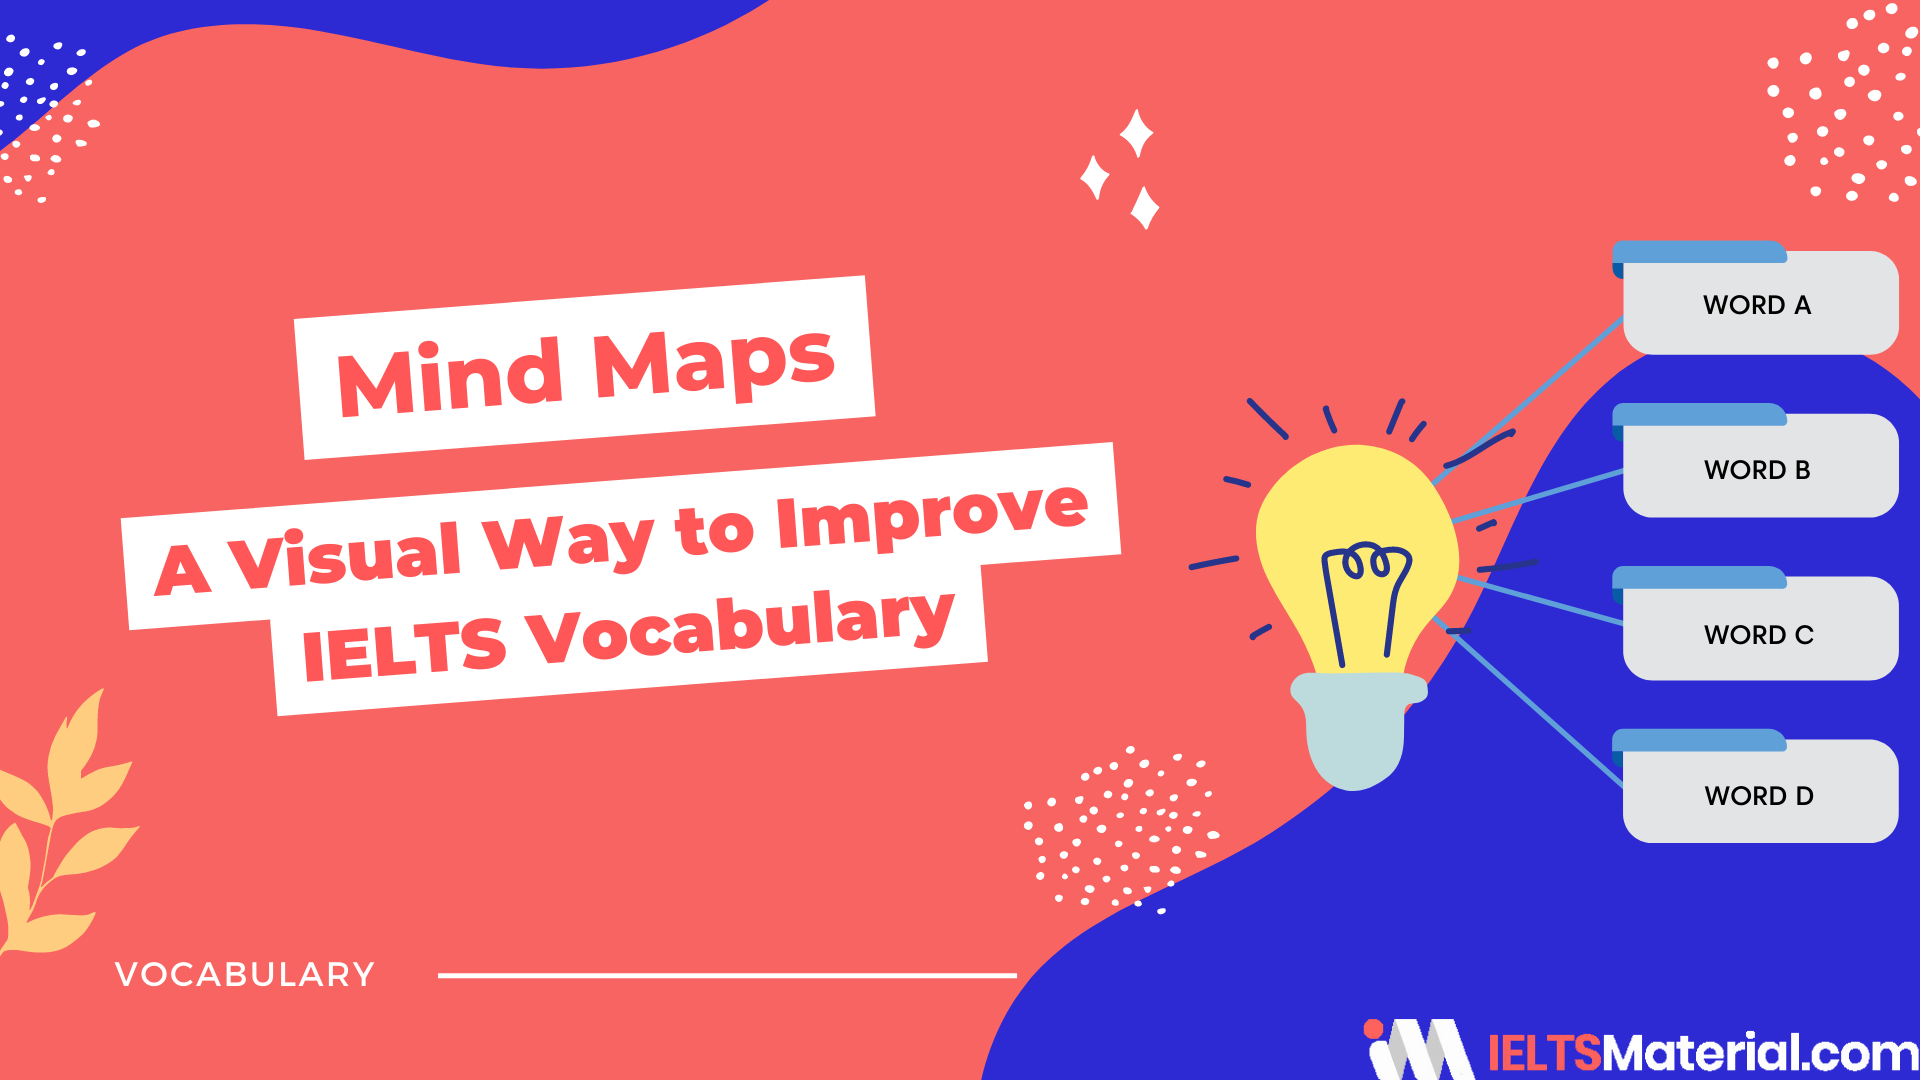 Mind Maps for Vocabulary: A Visual Way to Improve Significantly